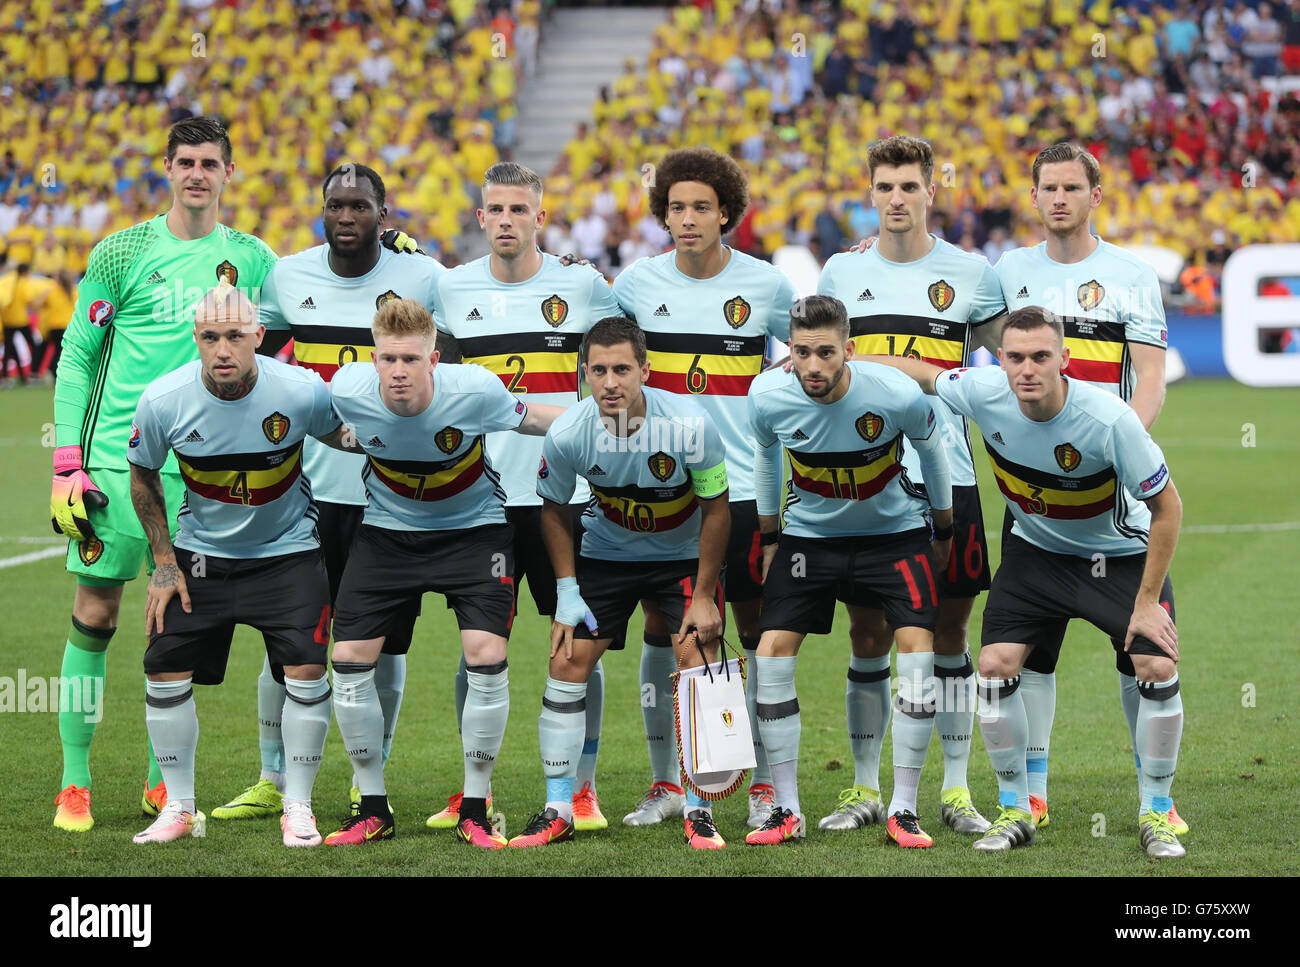 NICE, FRANCE - JUNE 22, 2016: Players of Belgium national football team pose for a group photo before UEFA EURO 2016 game agains Stock Photo